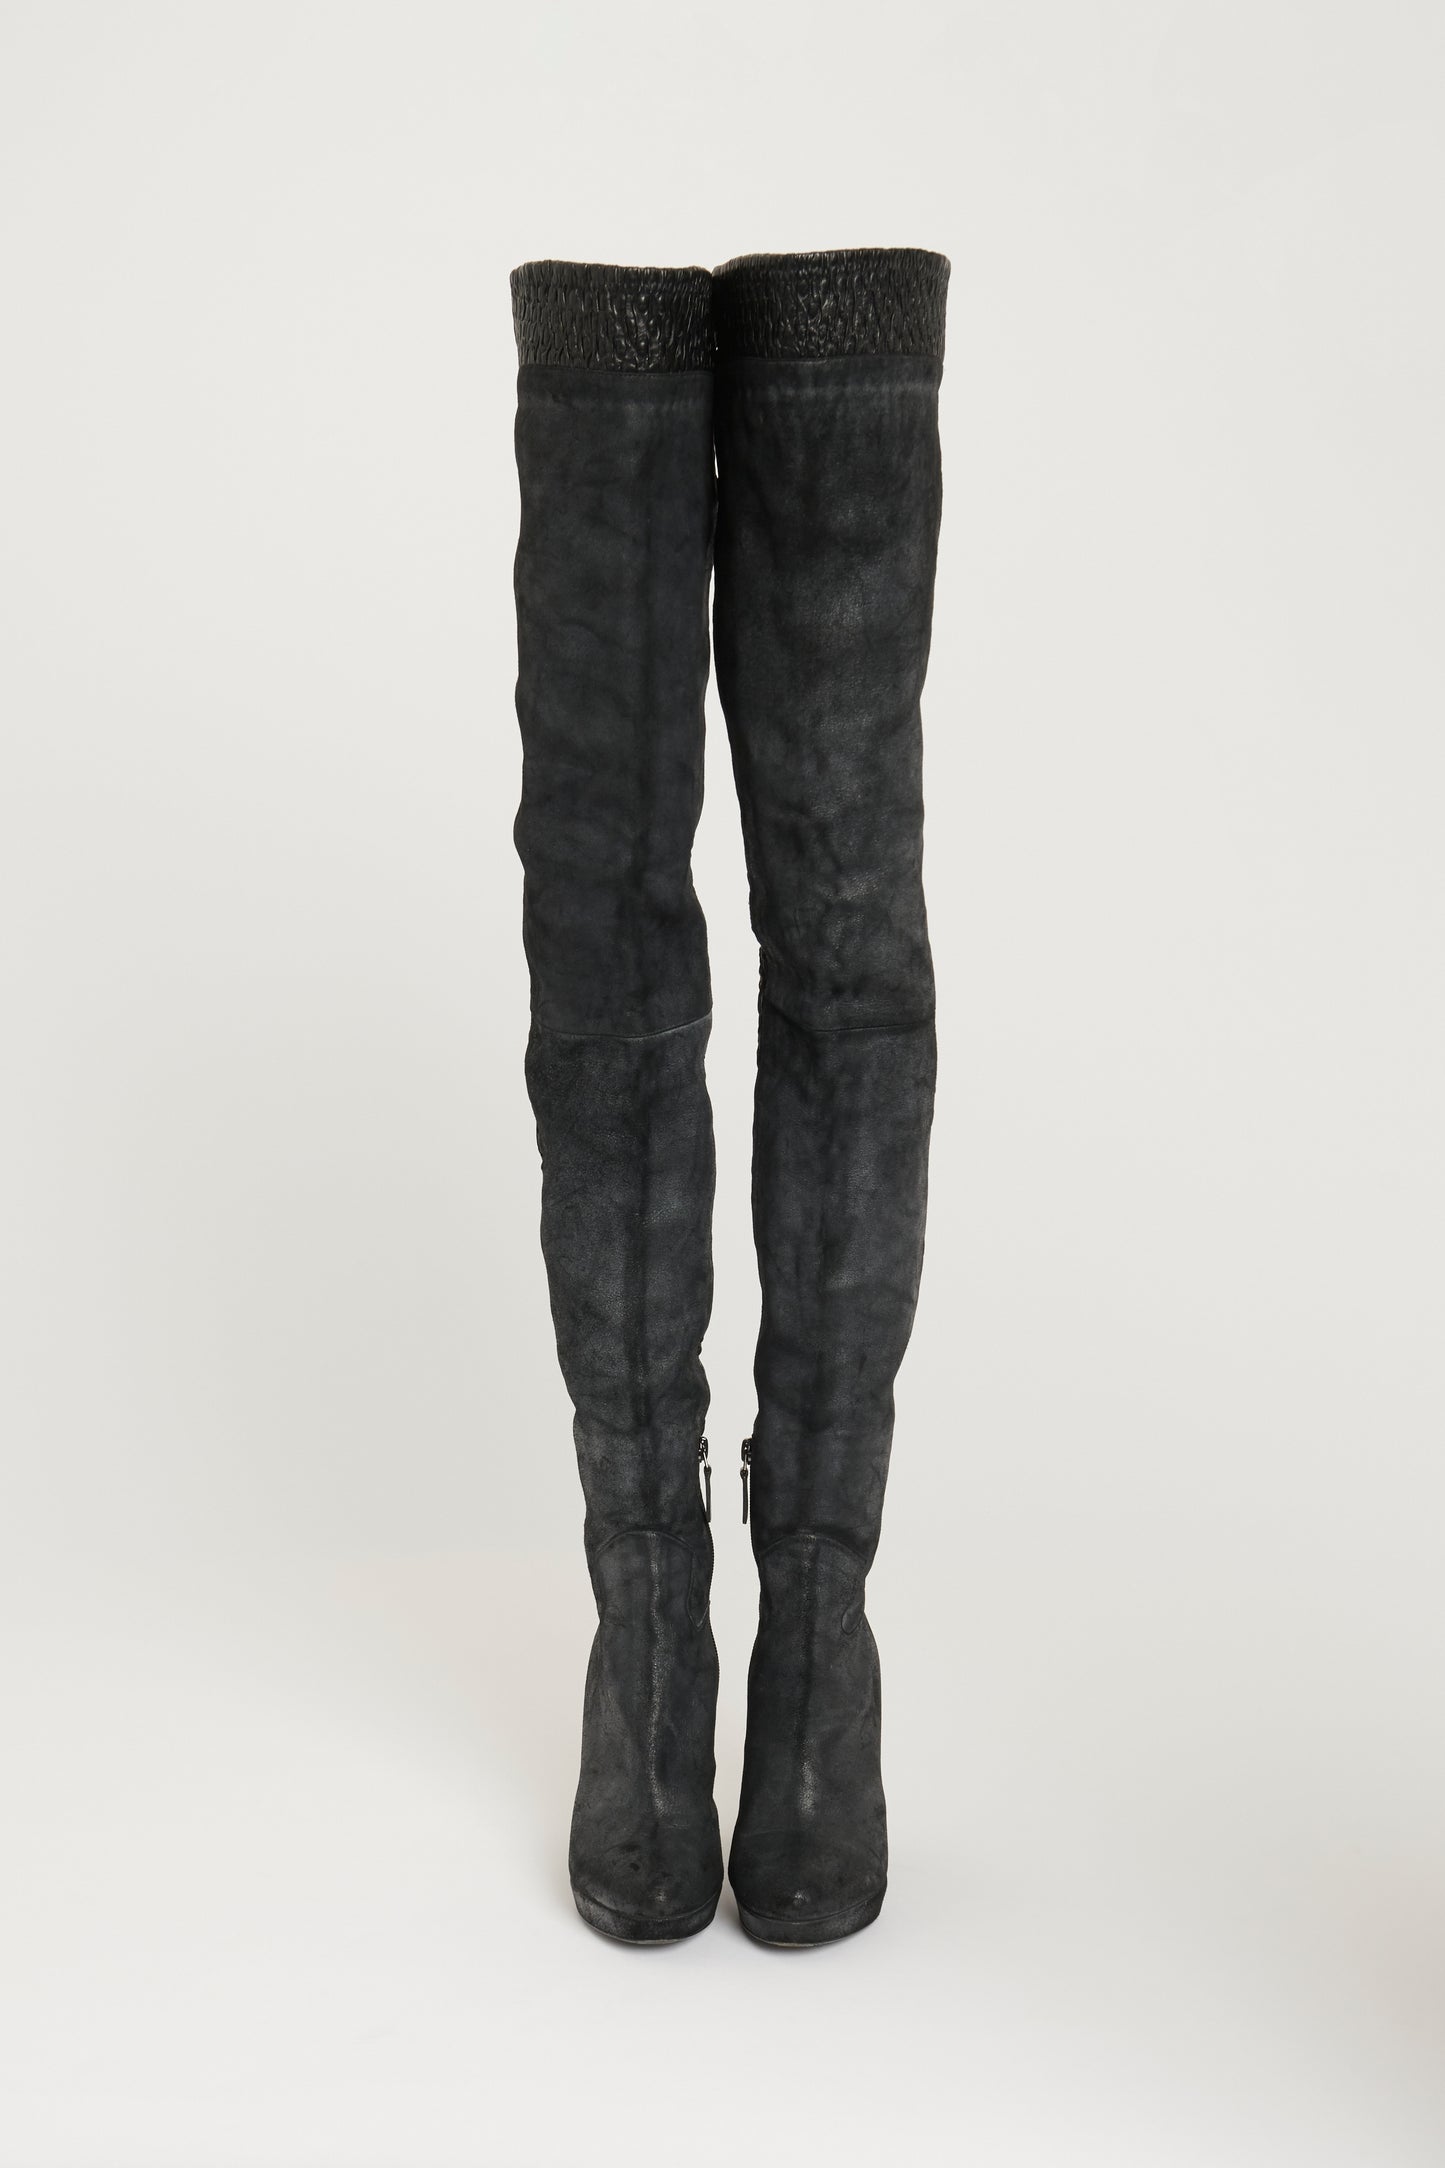 Anthracite Leather Preowned Thigh-High Boots